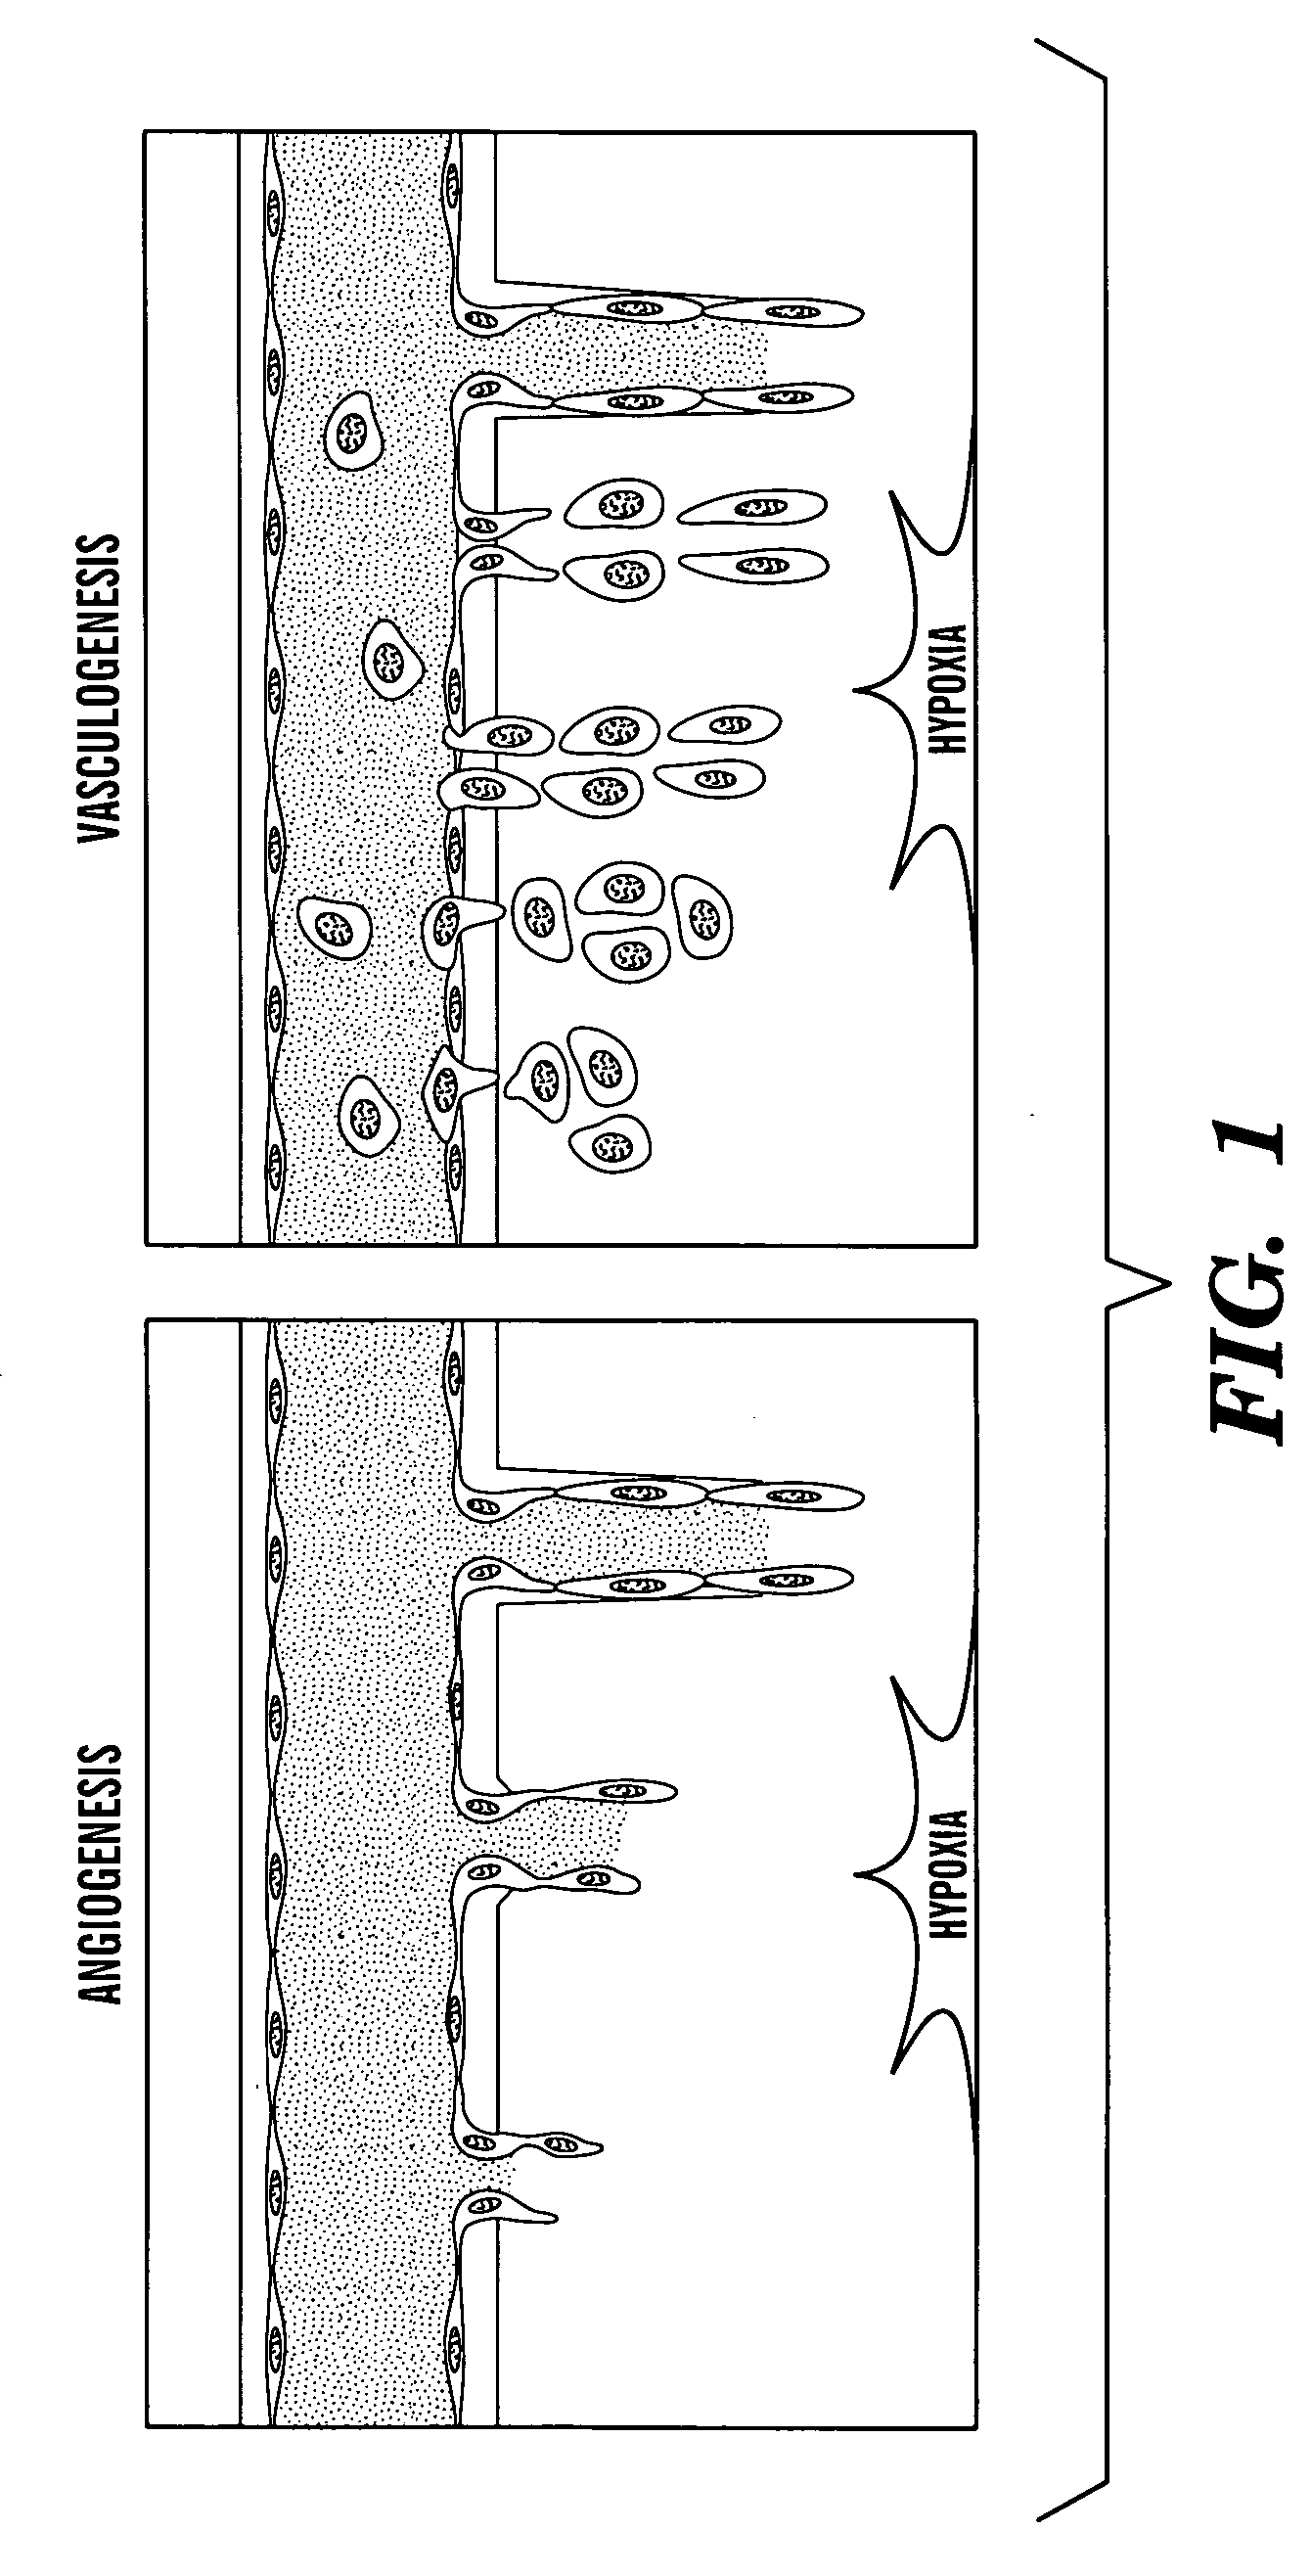 Method of treating or preventing pathologic effects of acute increases in hyperglycemia and/or acute increases of free fatty acid flux